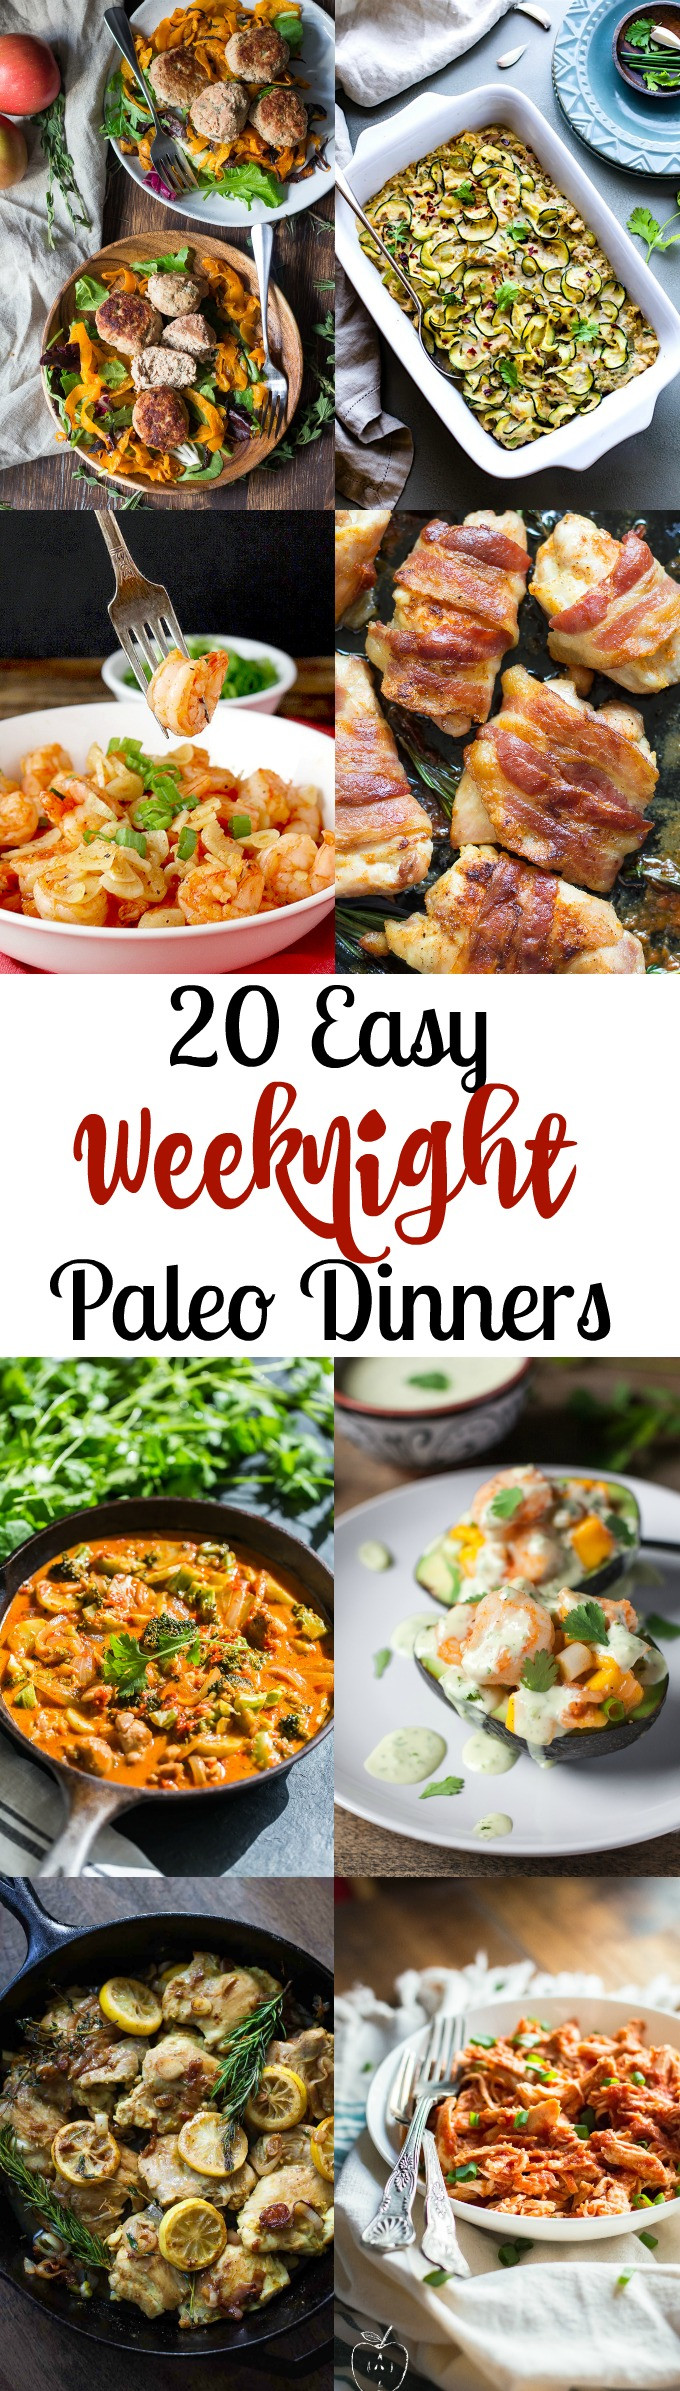 Quick And Easy Kid Friendly Dinners
 20 Easy Paleo Dinners for Weeknights